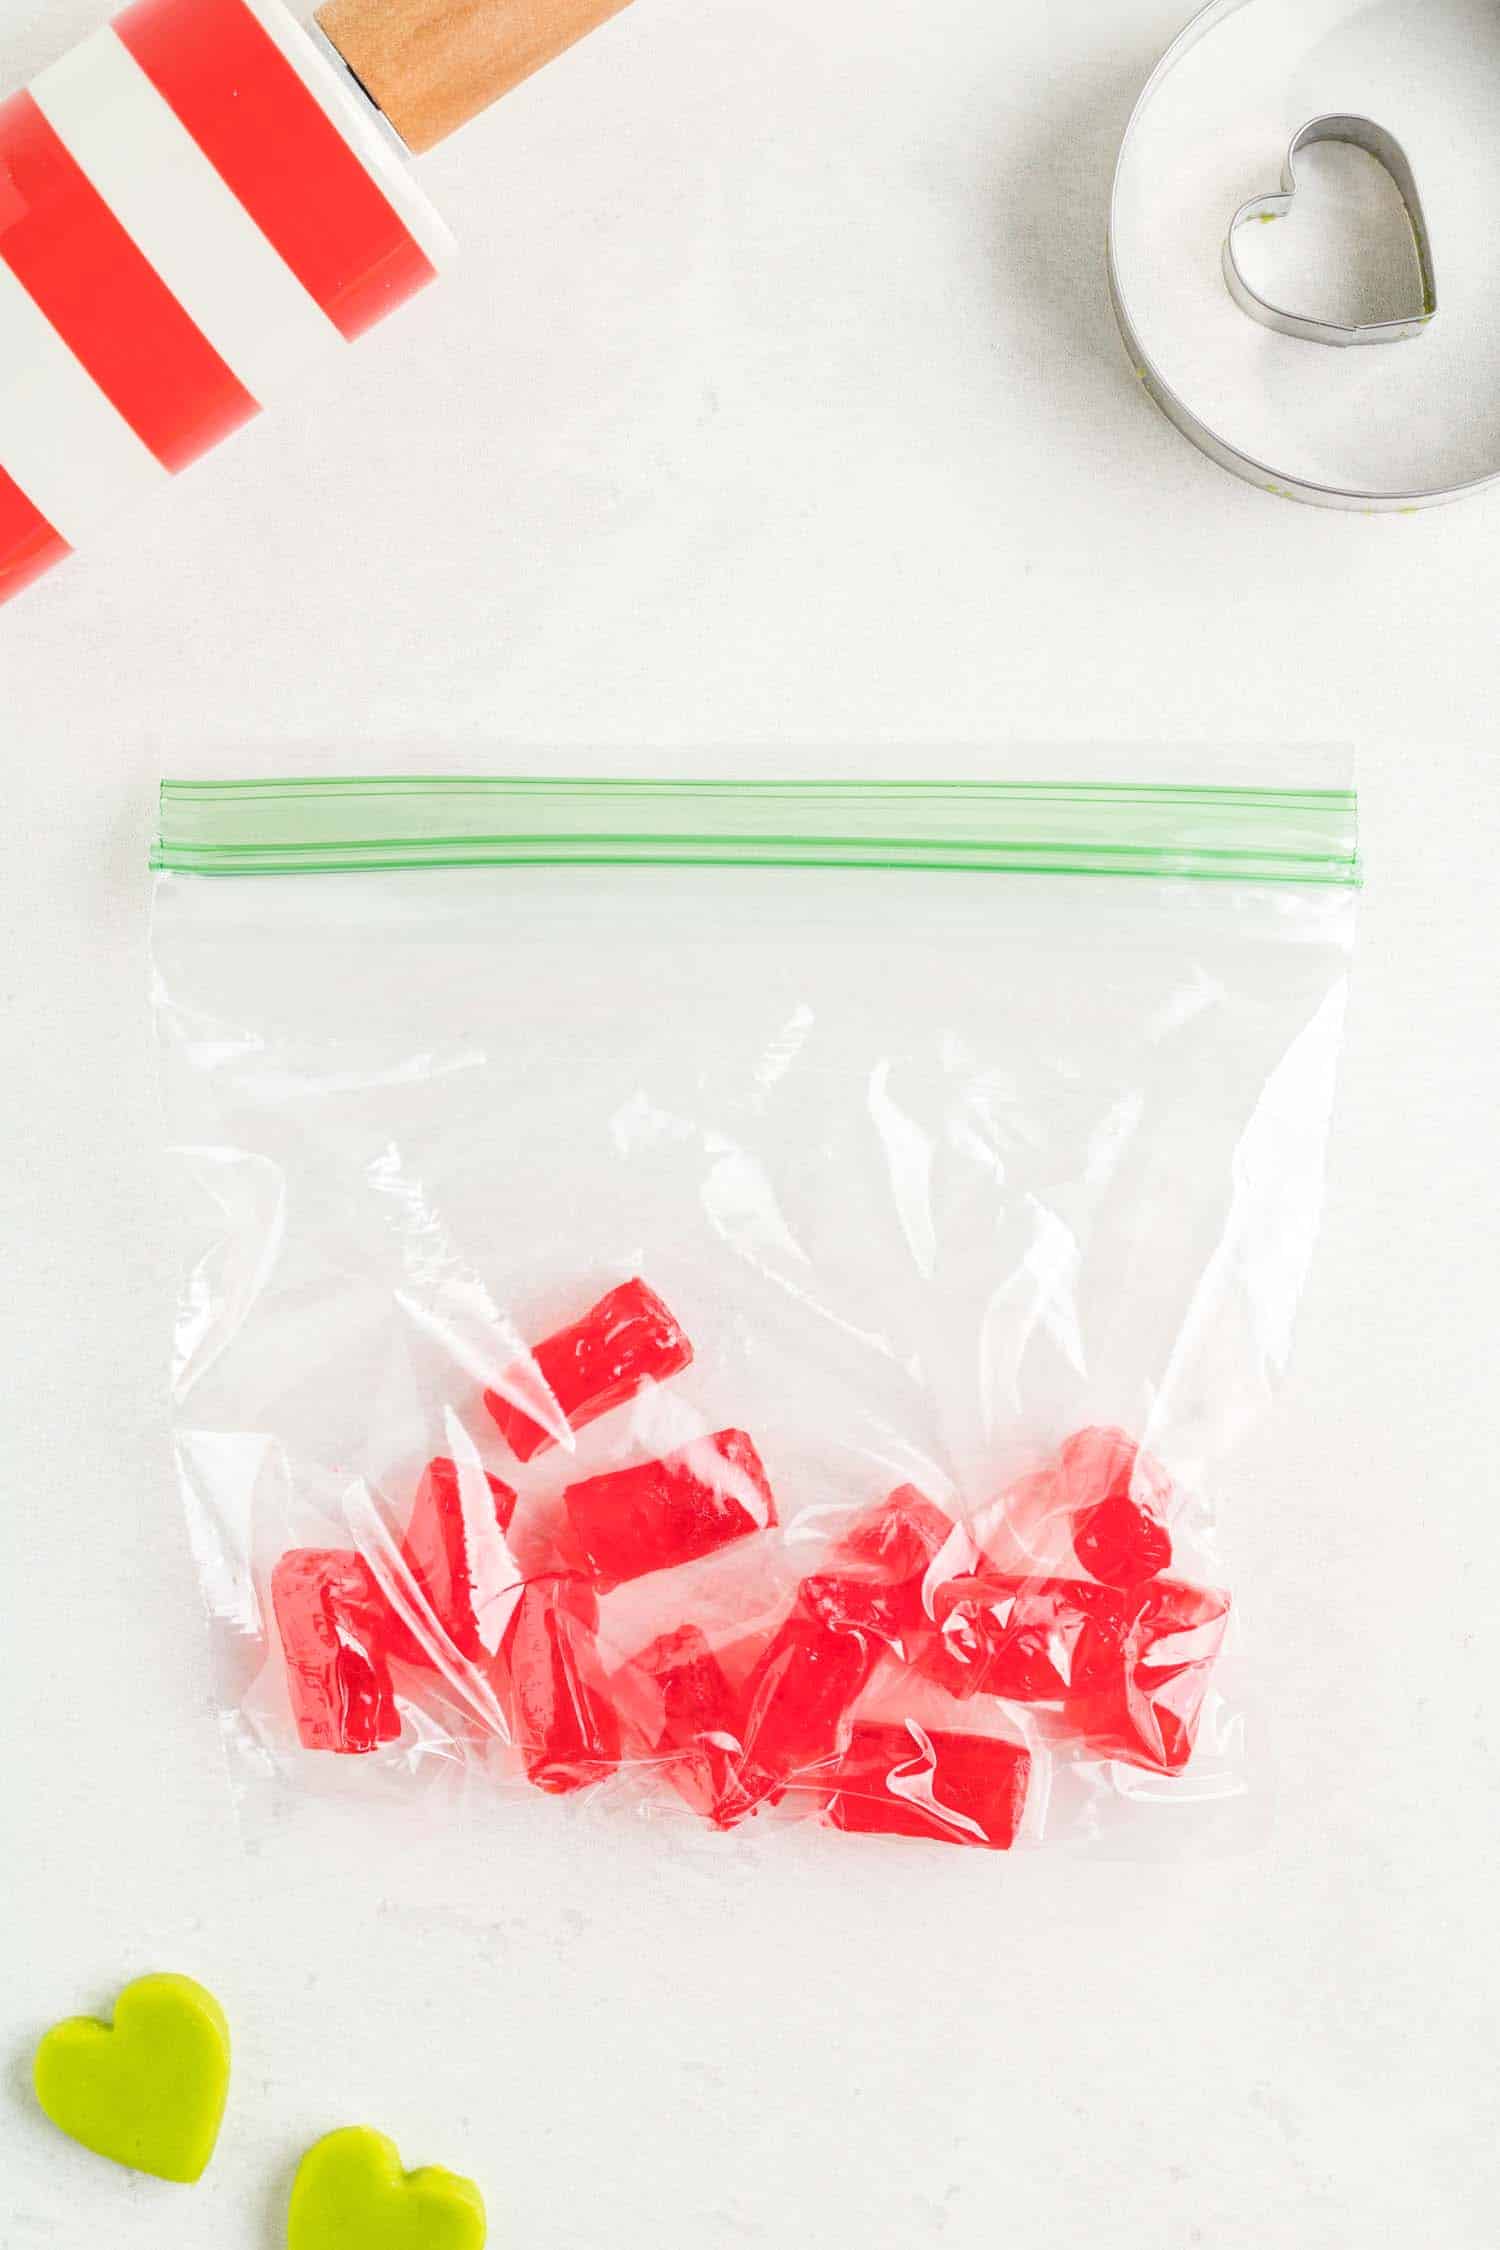 Red Jolly Rancher Candy in Plastic Bag